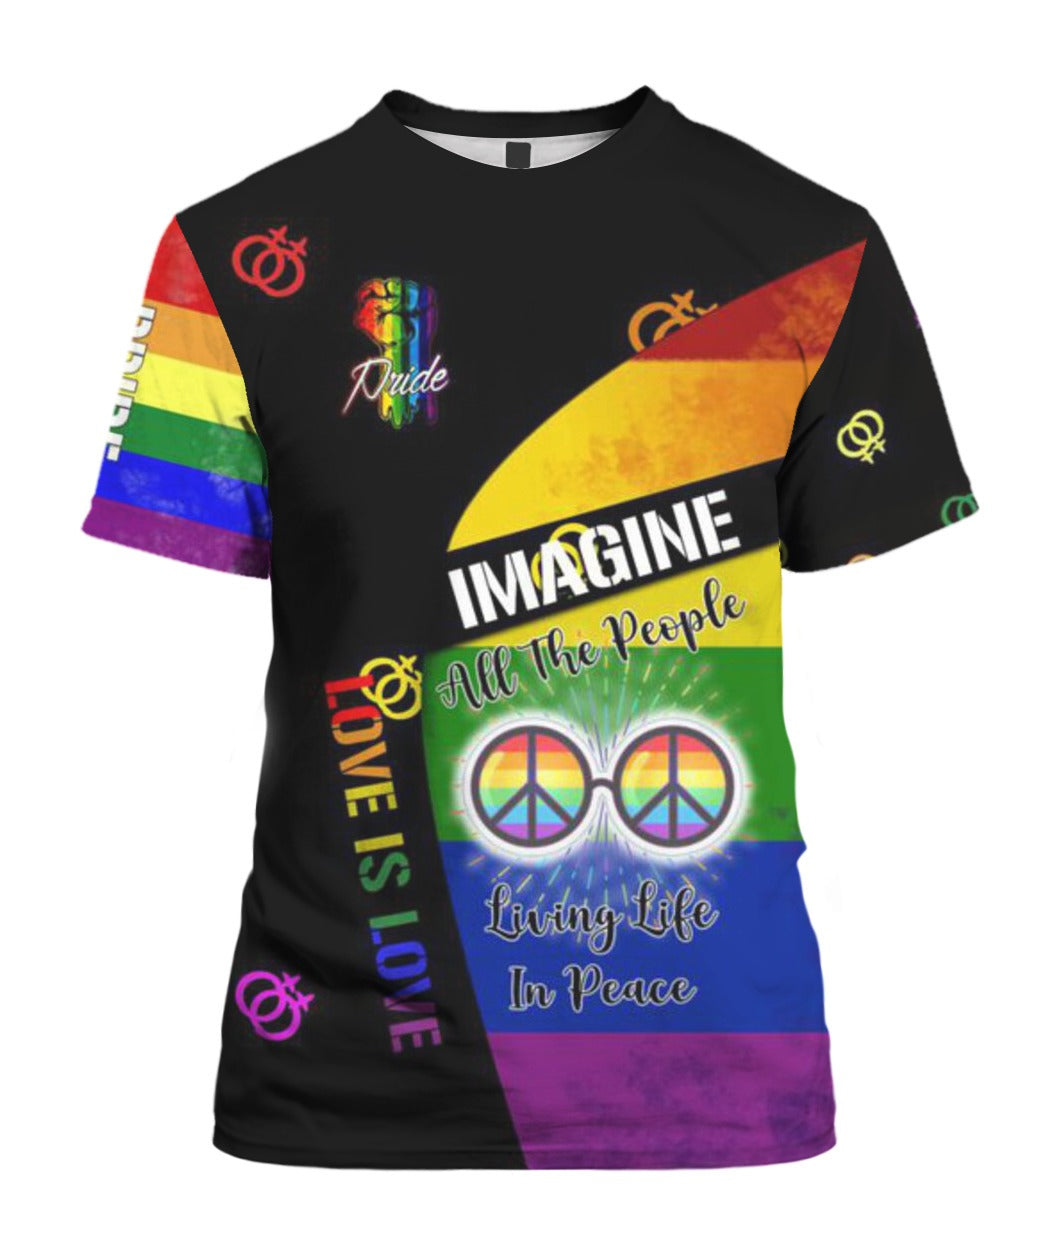 3D All Over Print Pride Lgbtq Shirt For Lesbian Gayer/ Love Is Love Rainbow American Flag Support Lgbt 3D Shirt